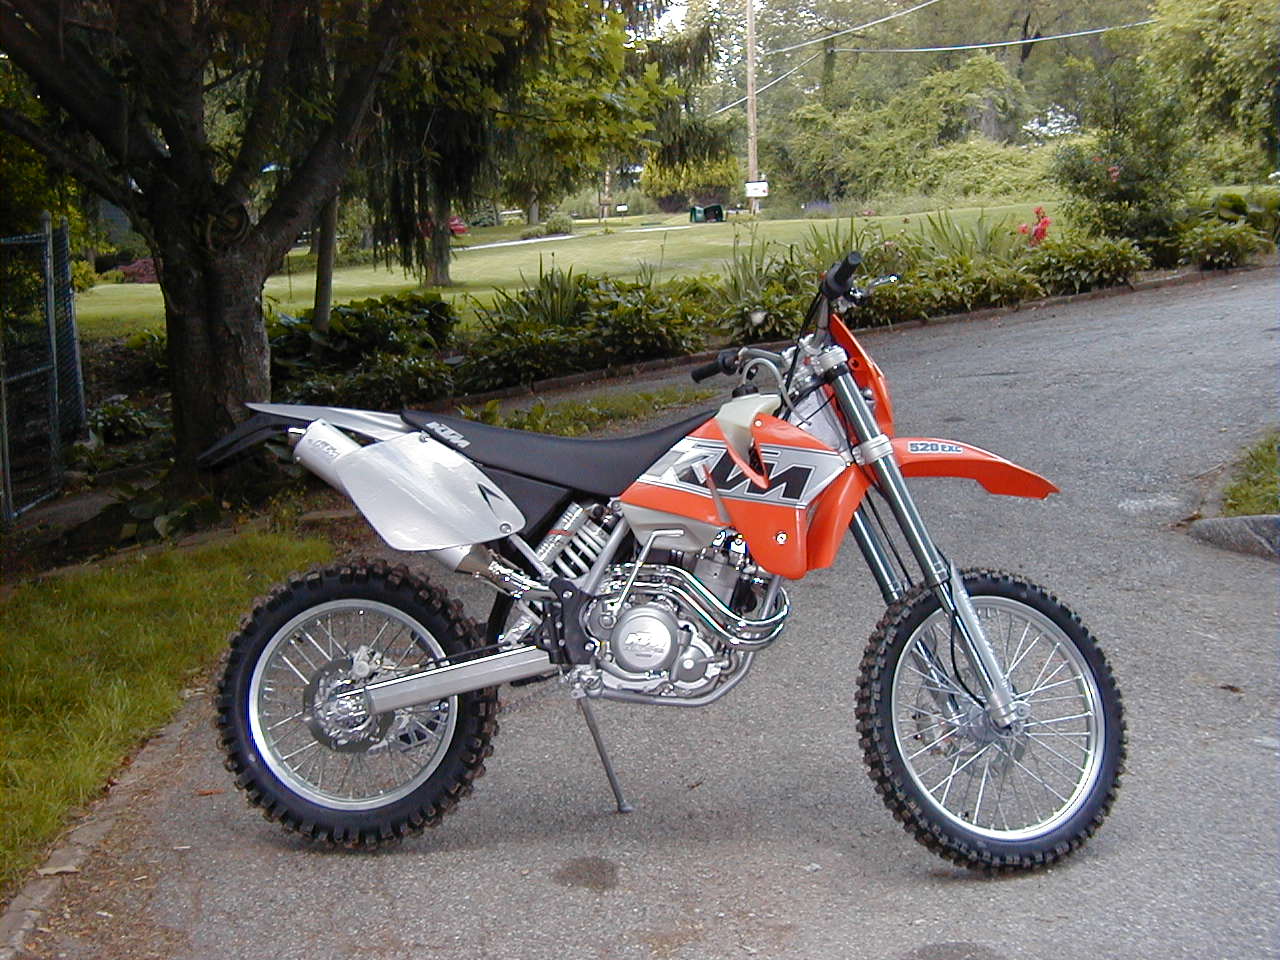 the first KTM 520